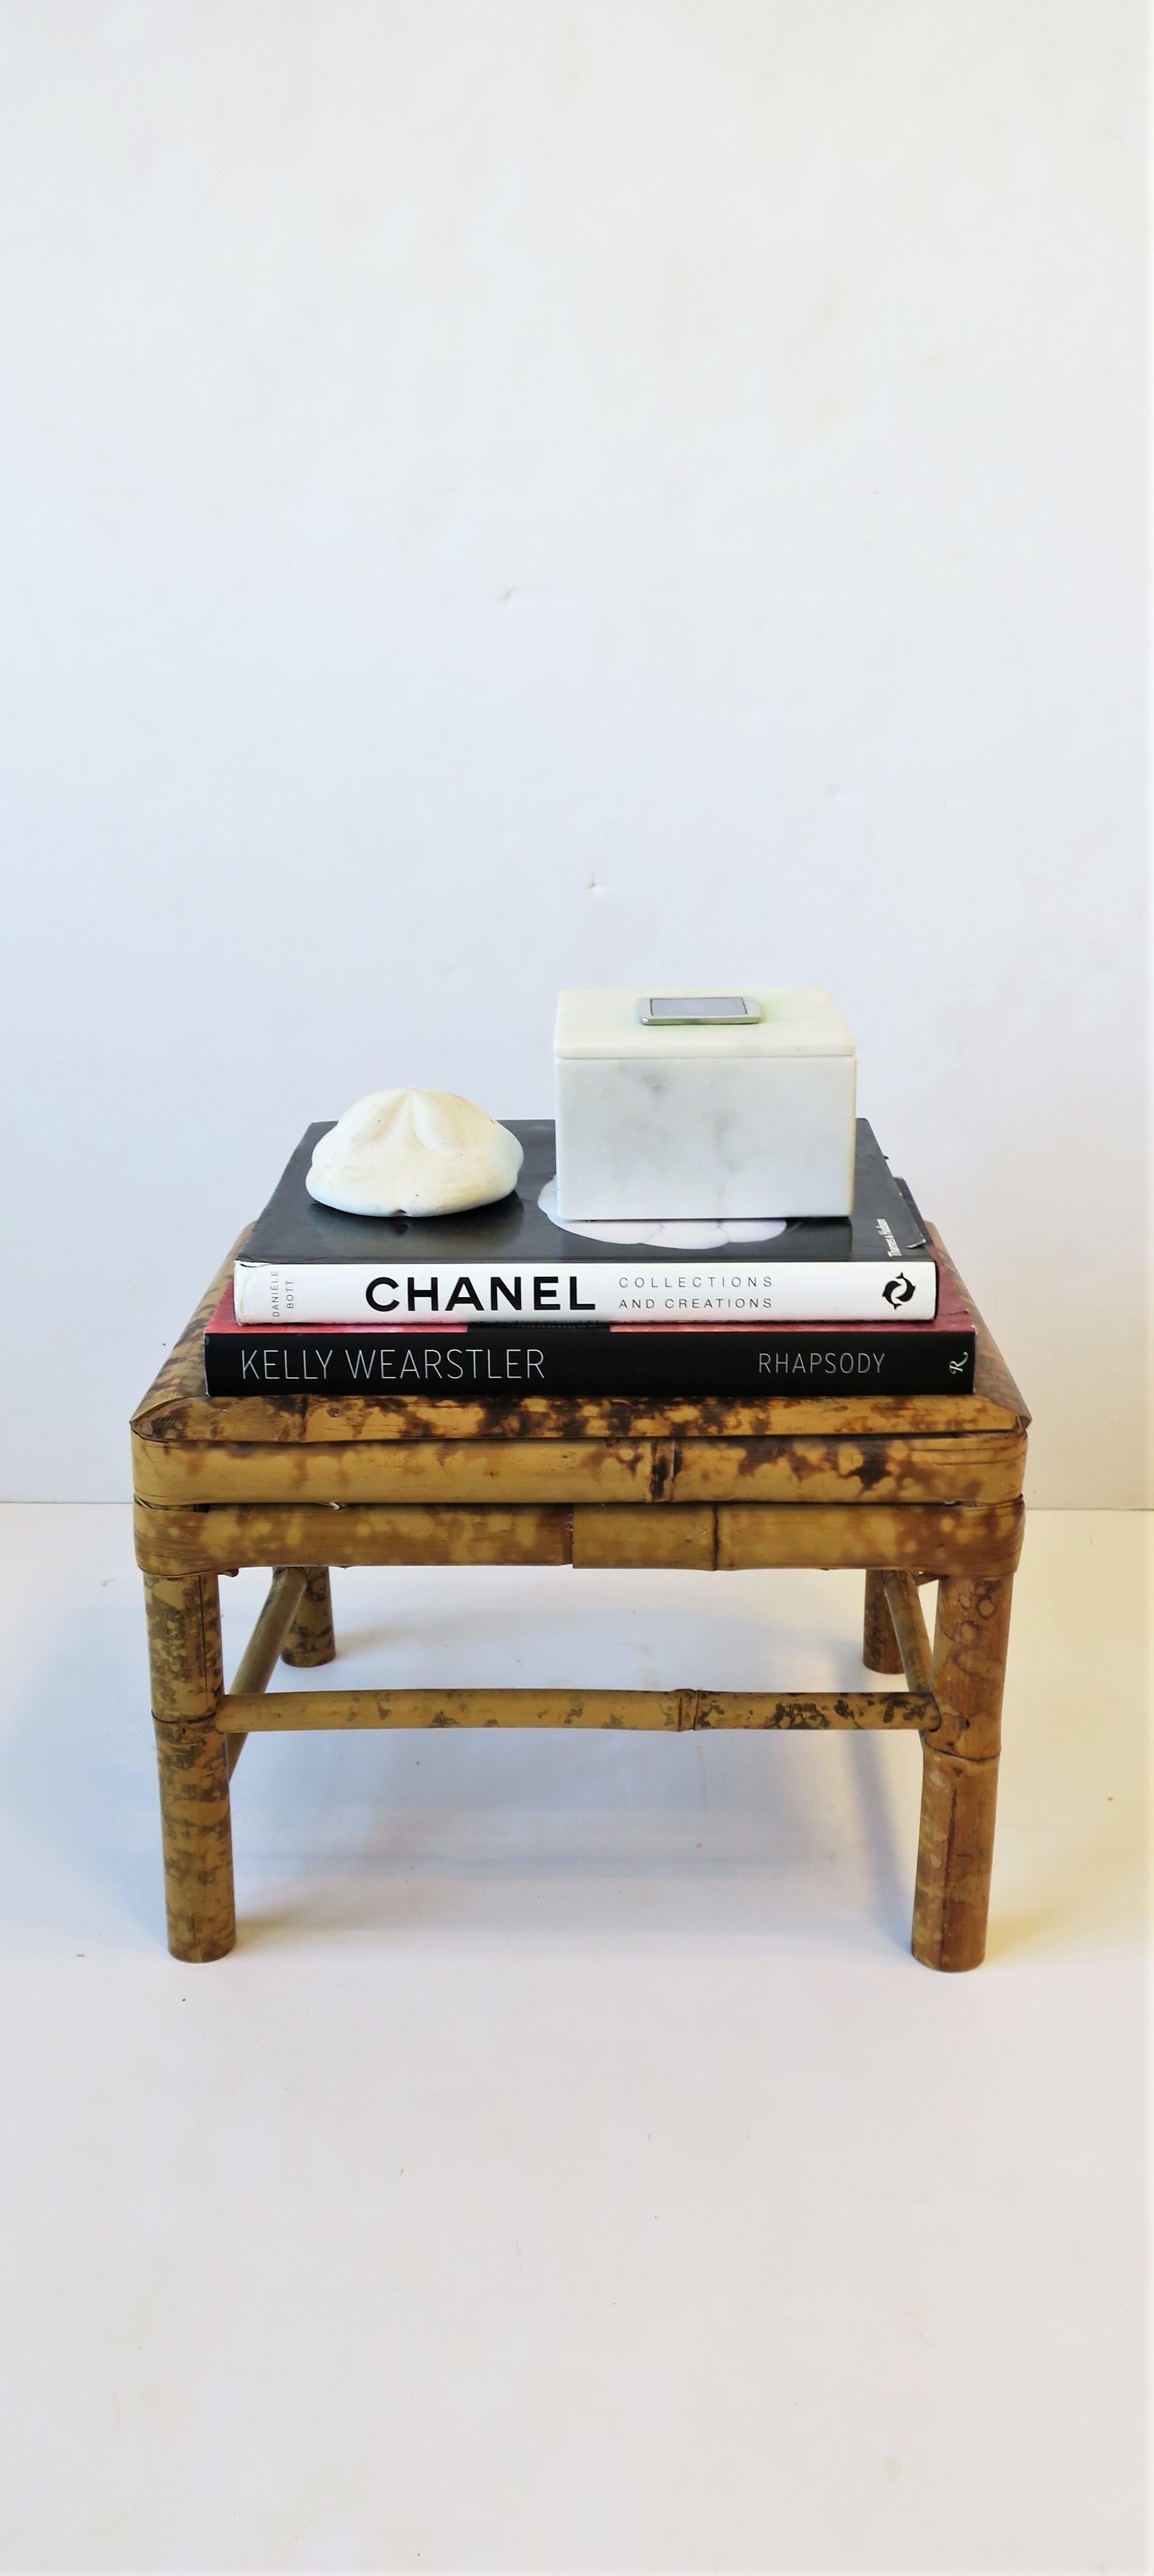 Contemporary Marble and Onyx Jewelry Box or Decorative Vanity Box For Sale